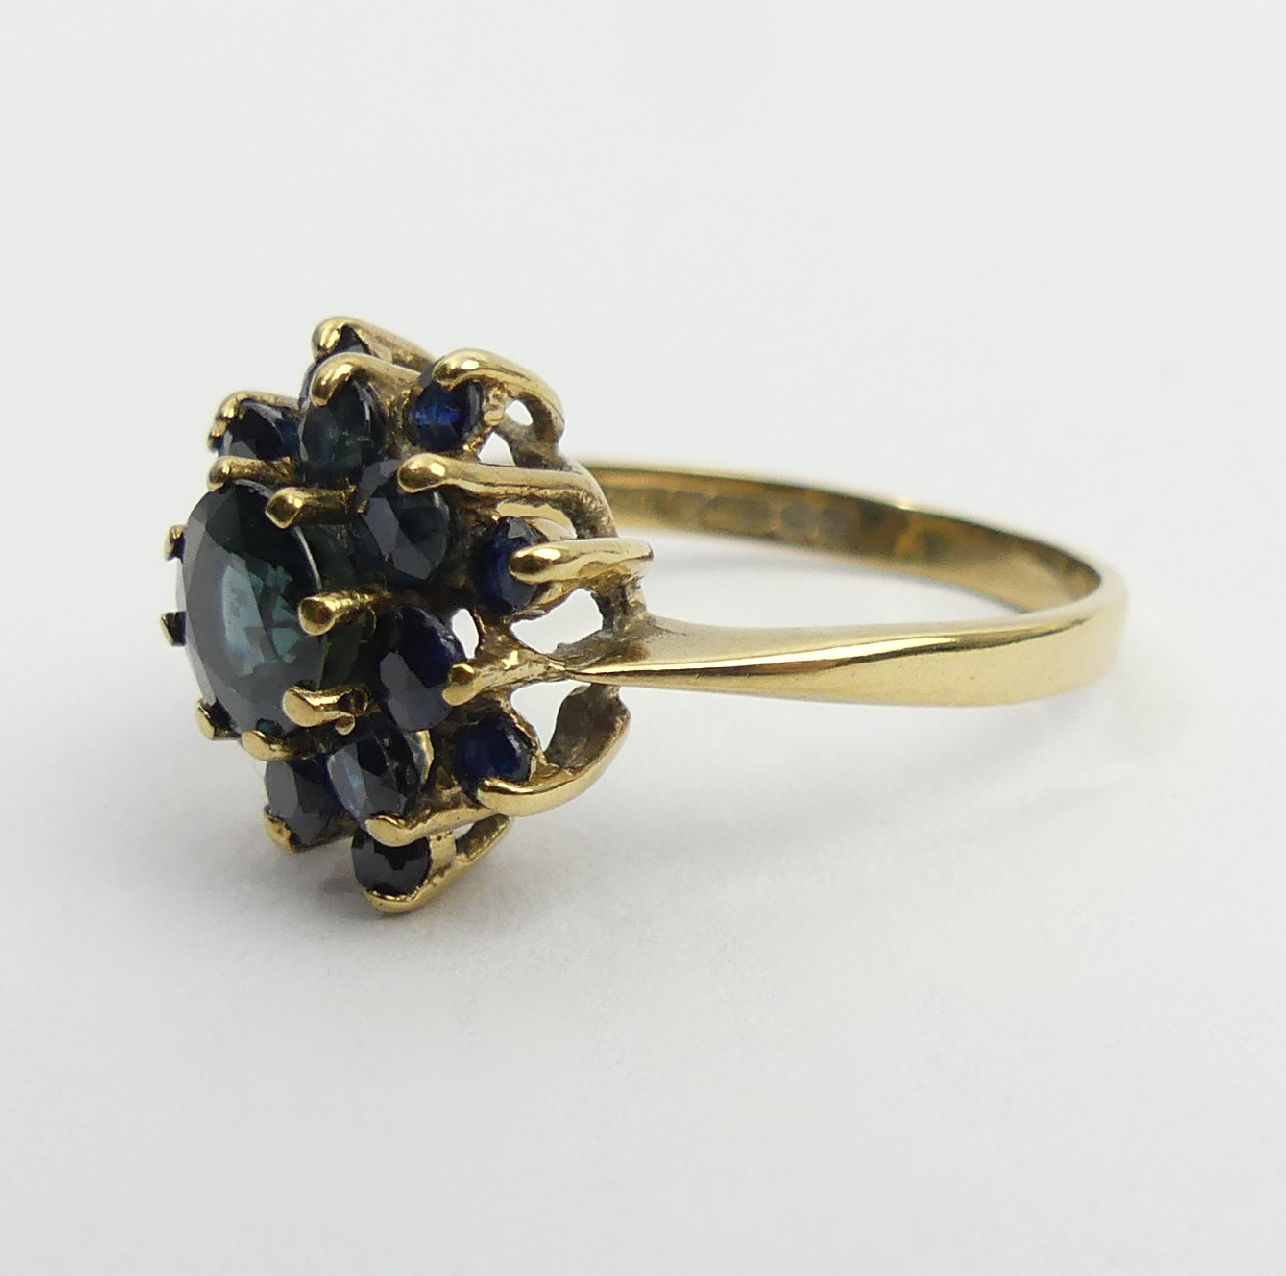 9ct gold sapphire cluster ring, Birm. 1980, 3.4 grams, 14mm, size Q. UK postage £12 - Image 3 of 6